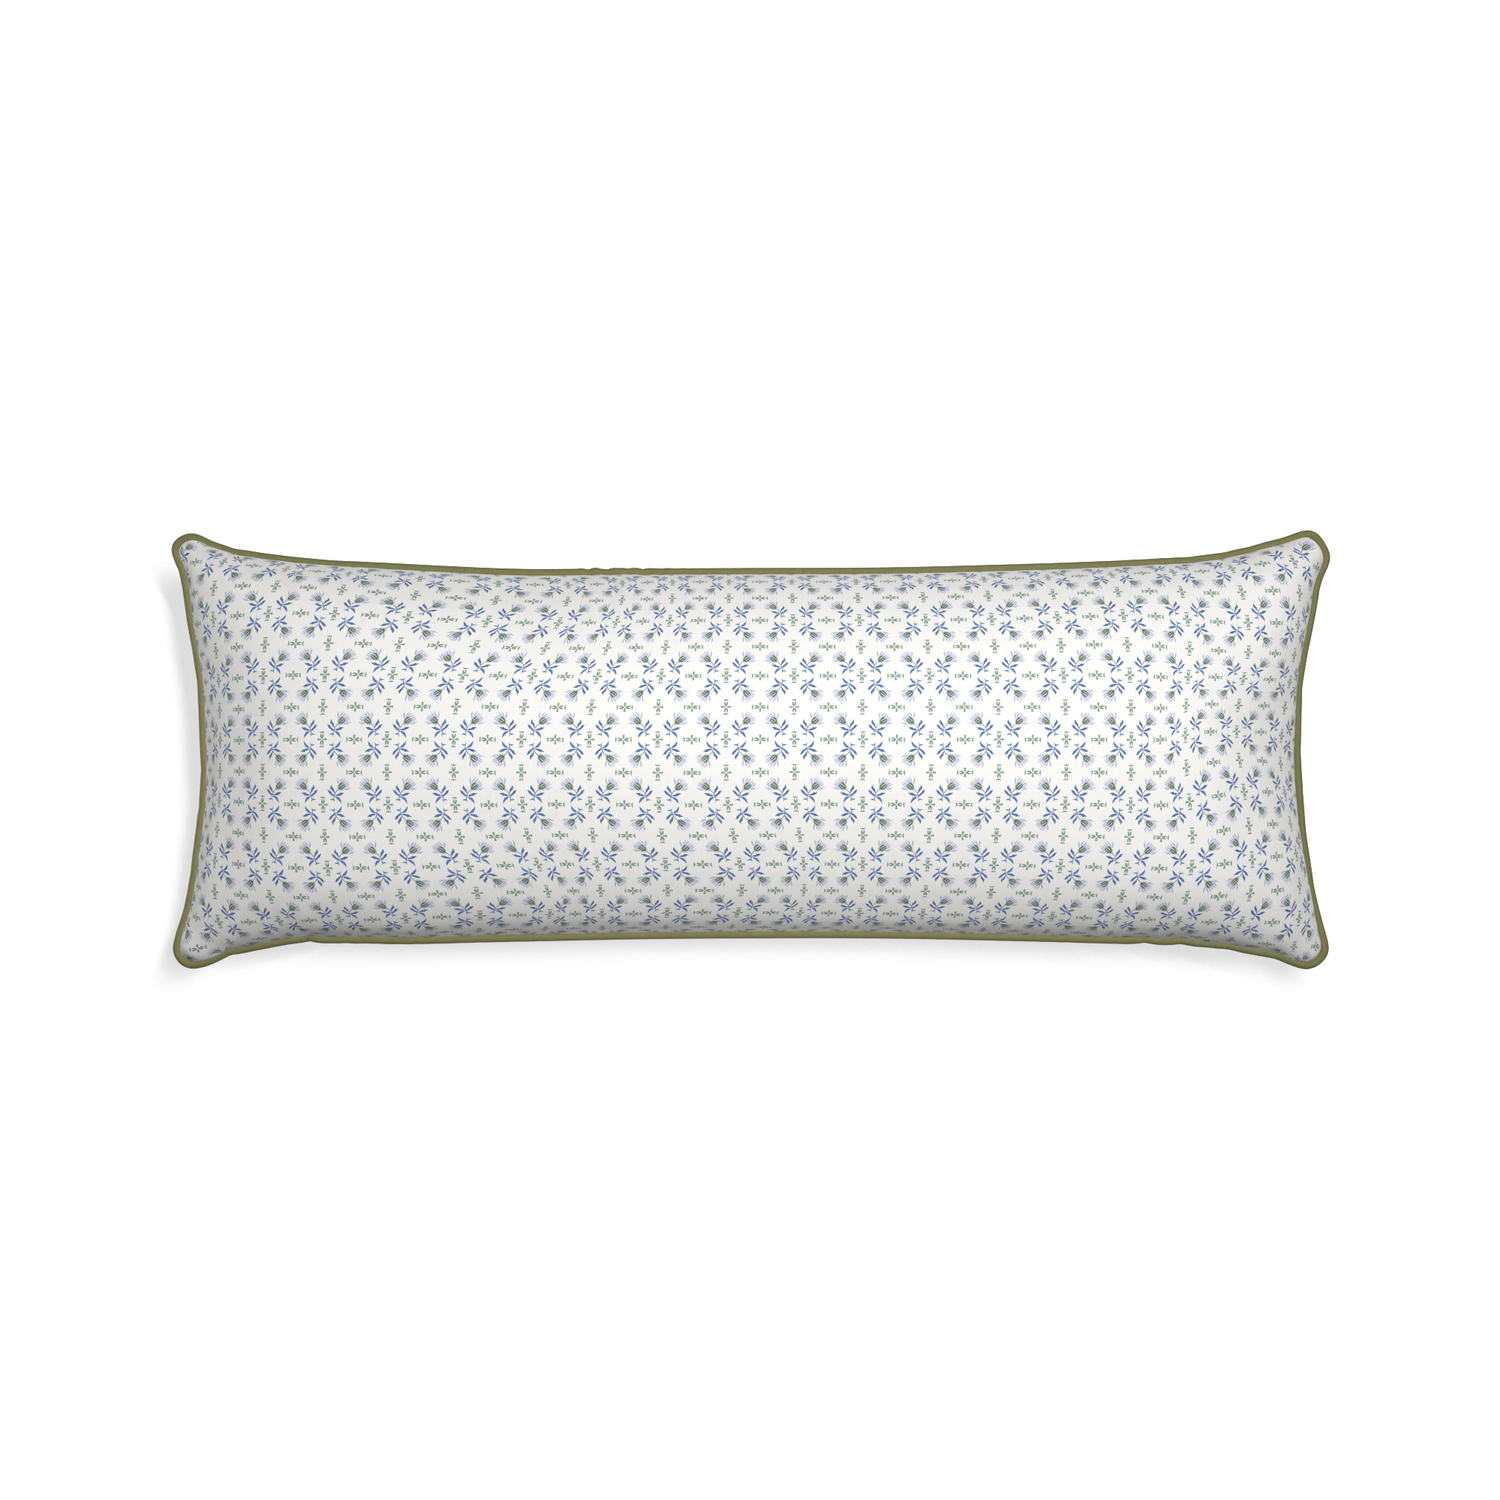 Xl-lumbar lee custom pillow with moss piping on white background